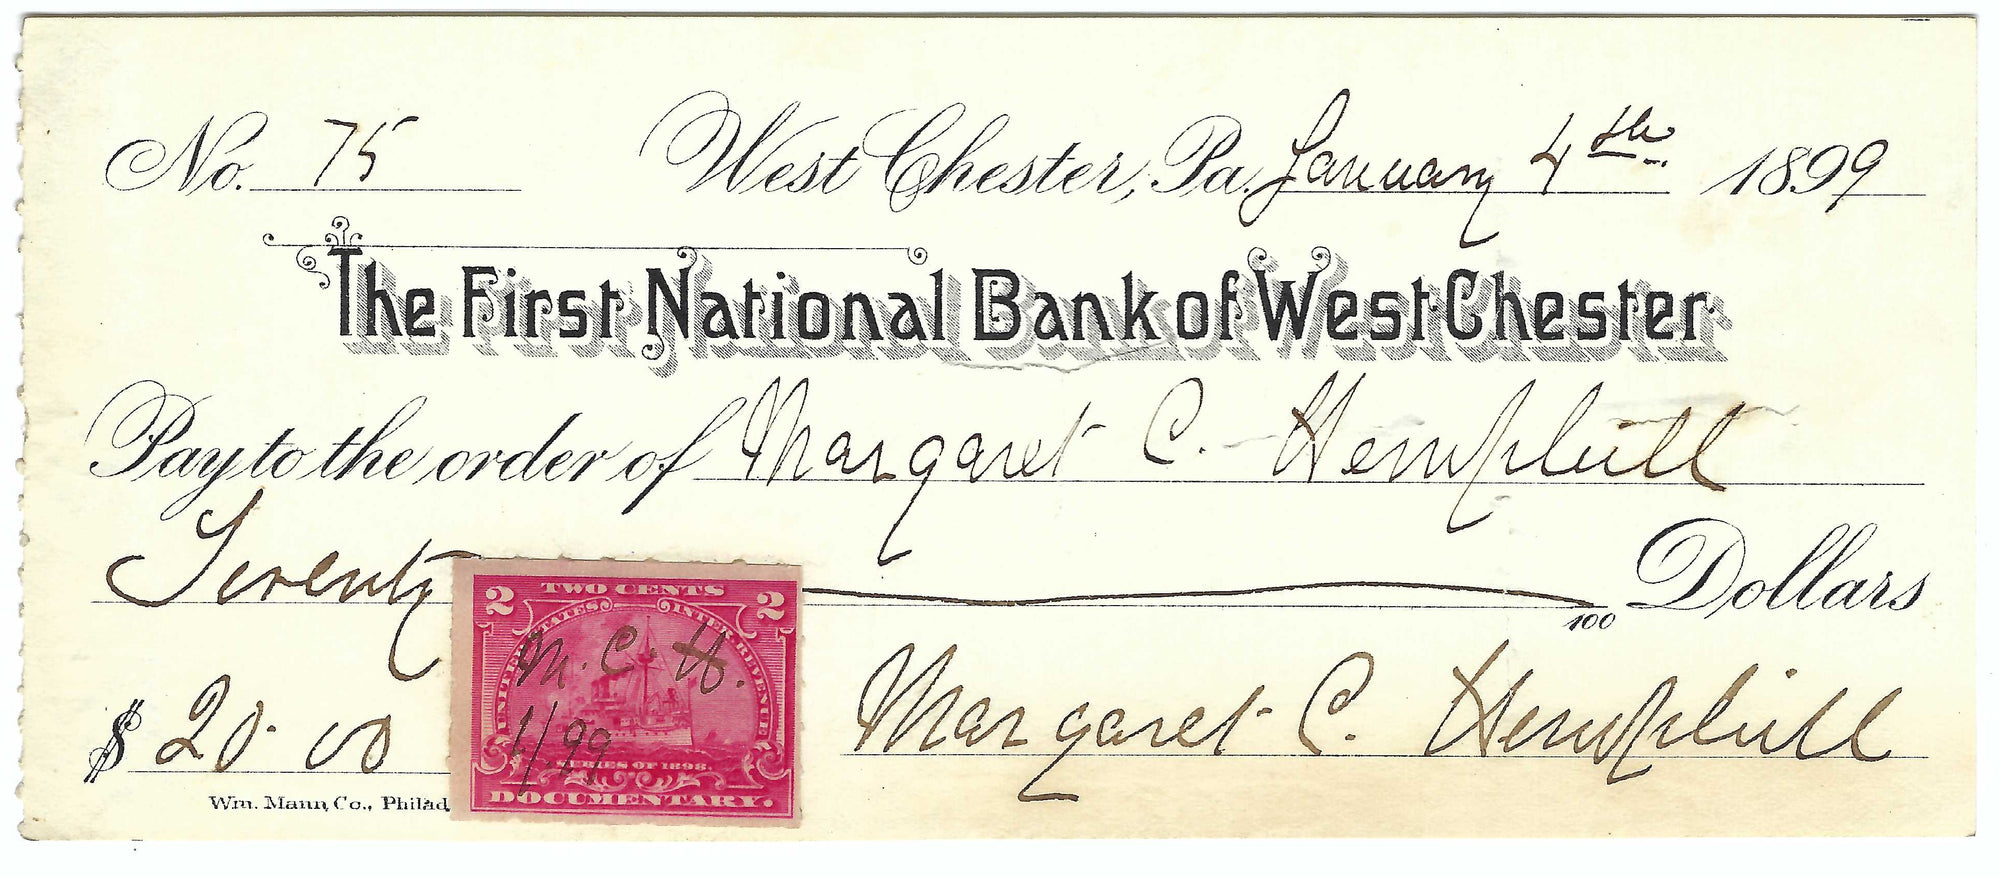 1899 Vintage Bank Check - First National Bank - West Chester, Pennsylvania